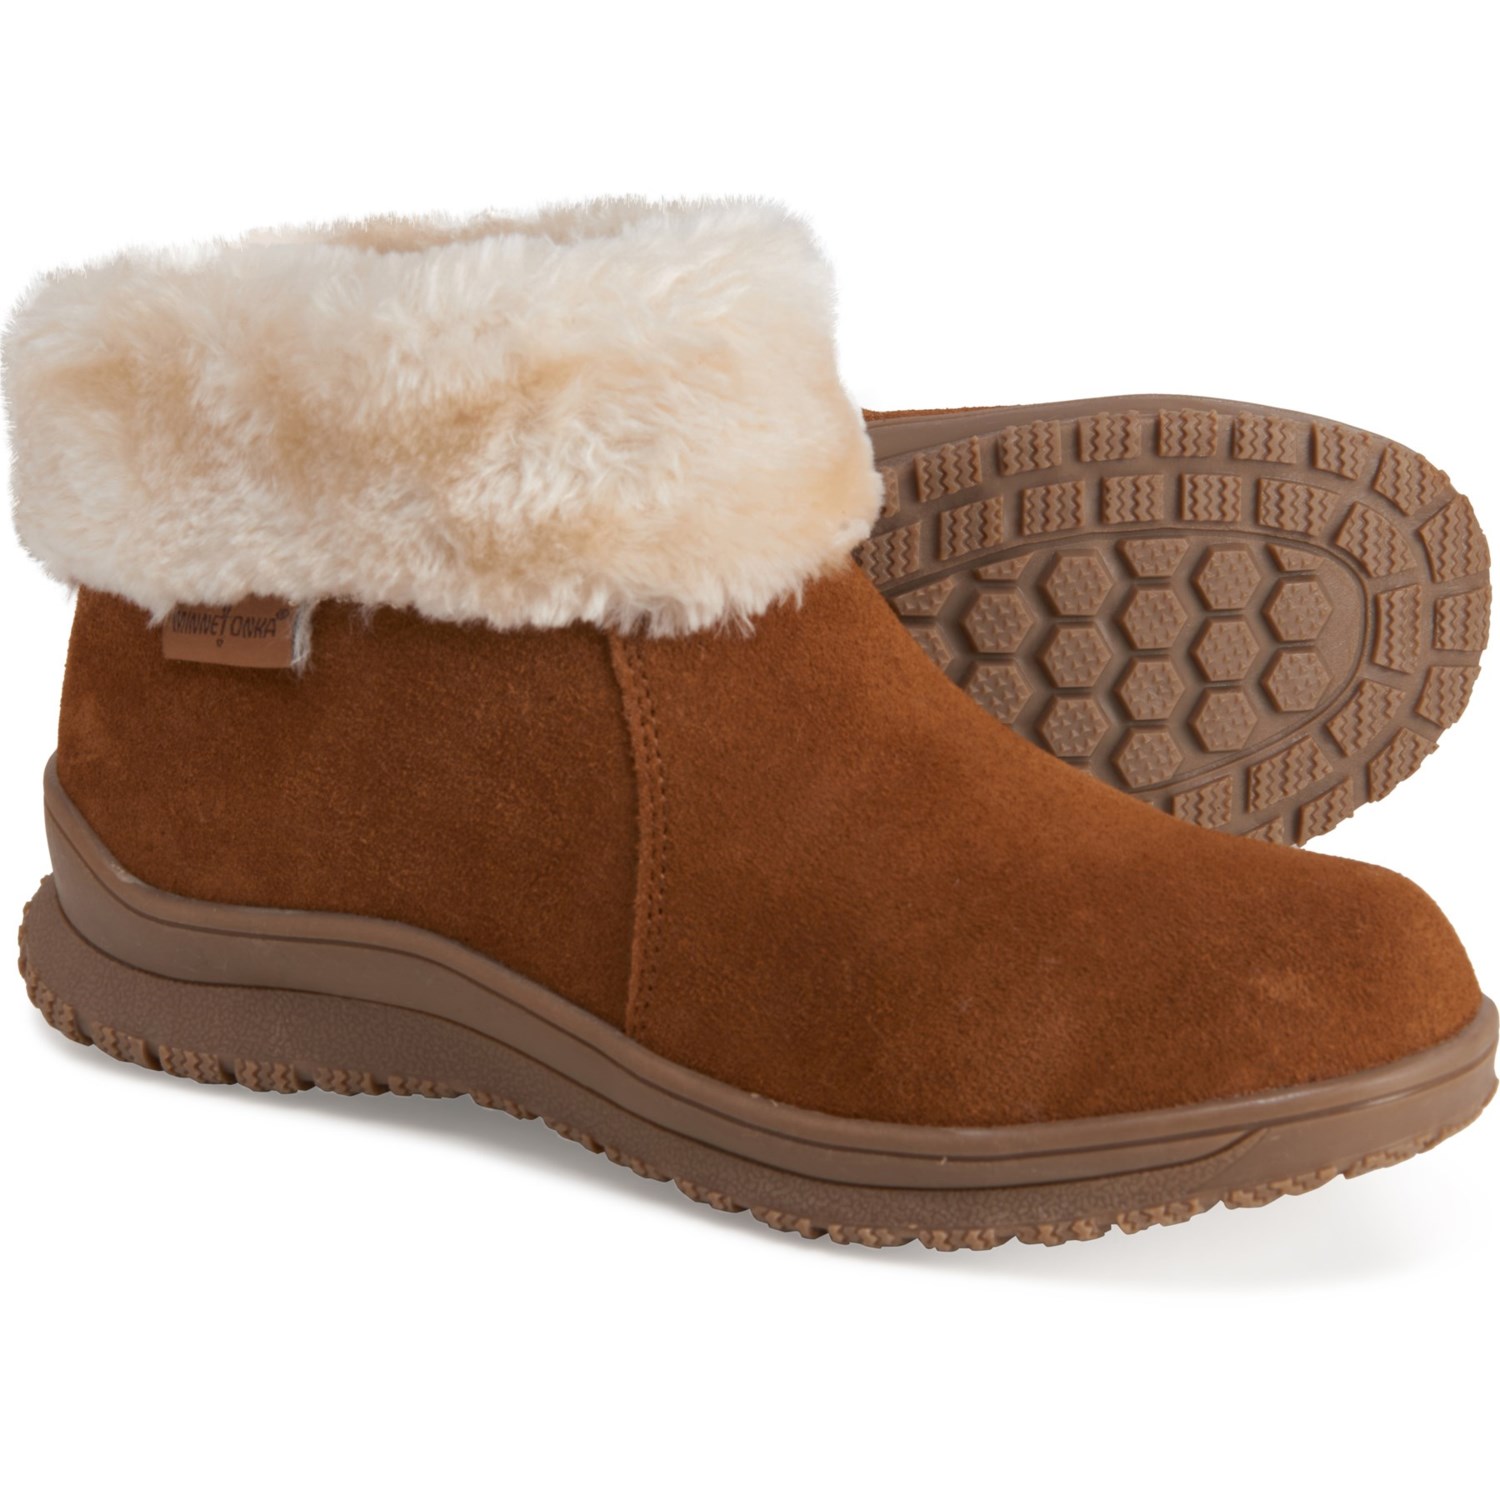 moccasin booties with fur